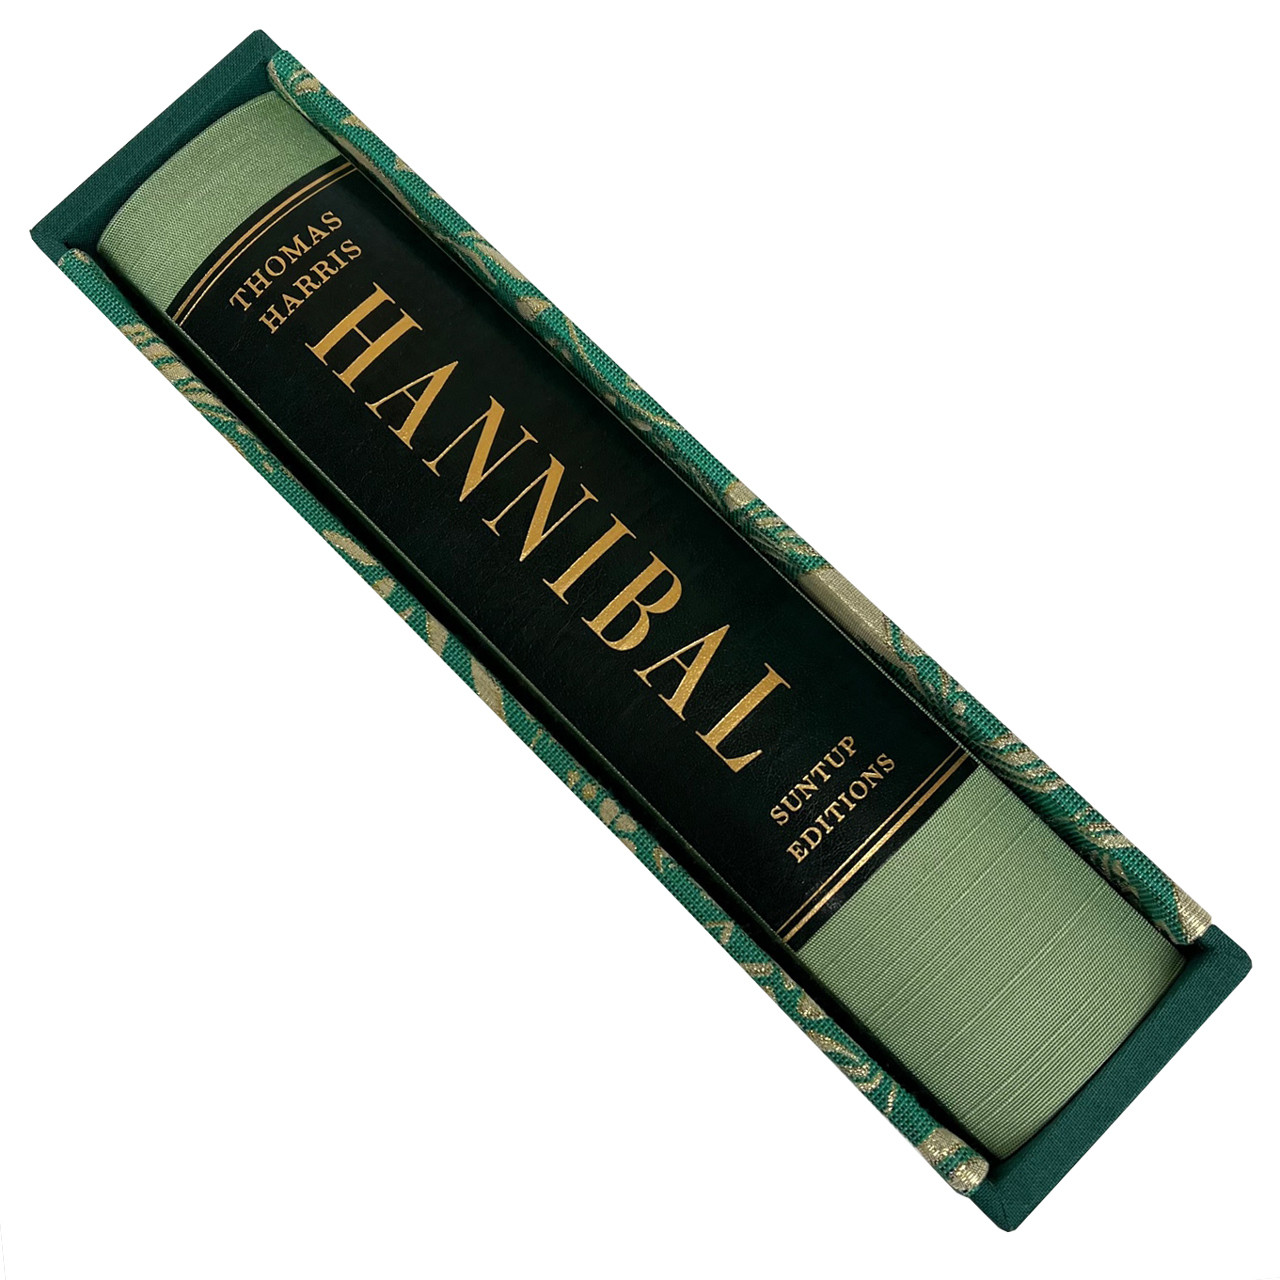 Thomas Harris "Hannibal" Slipcased Signed Limited Edition No. 275 of 350 w/Premiums [Very Fine]